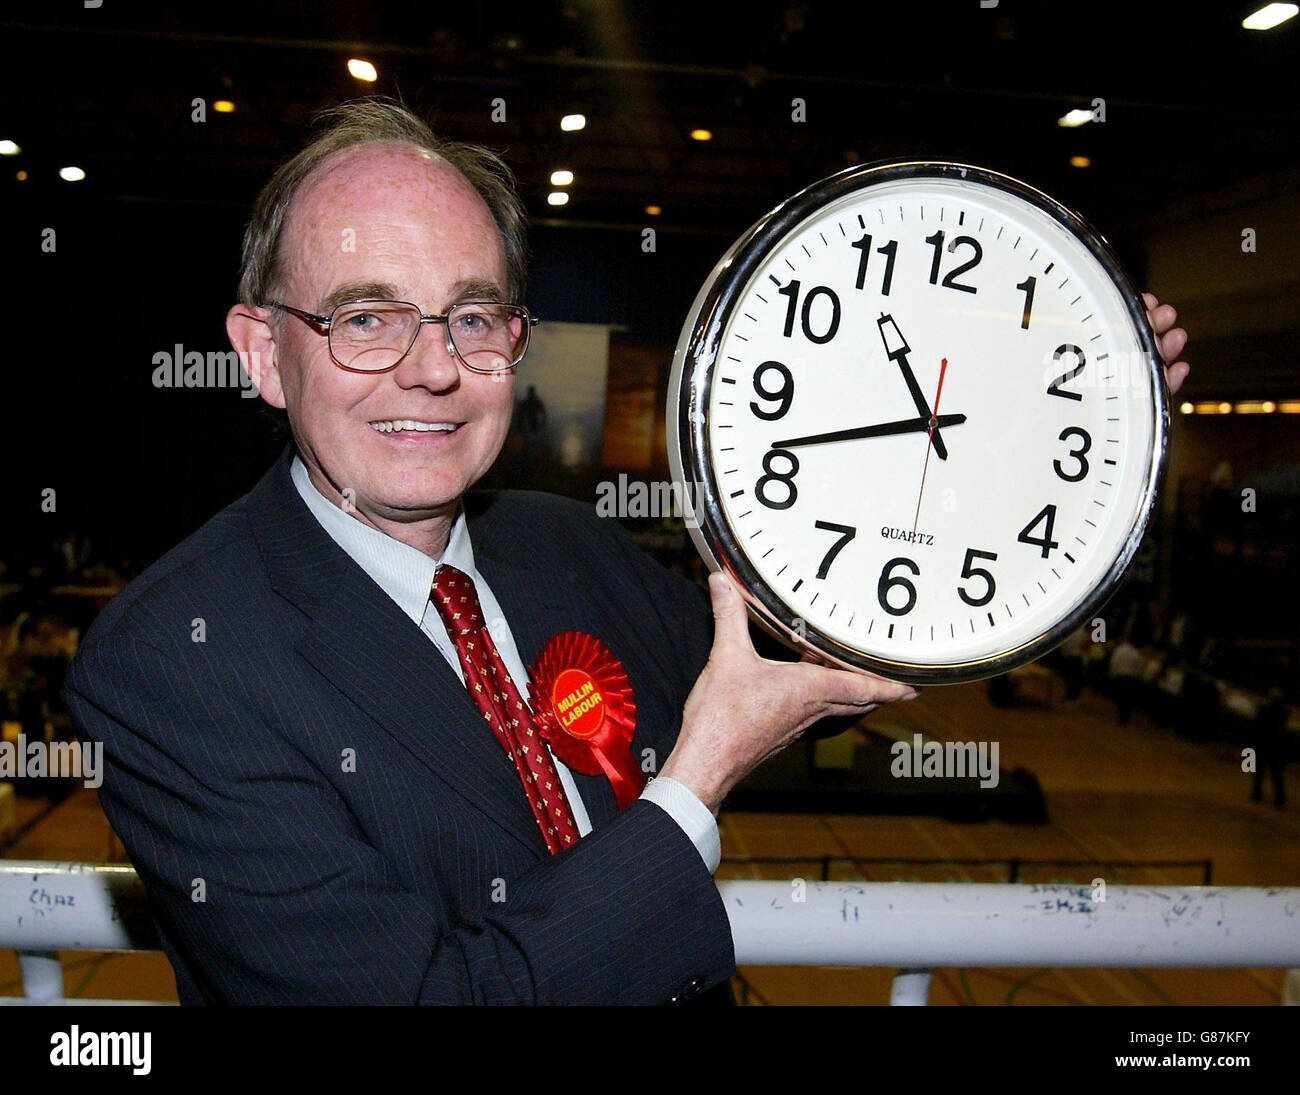 Labour candidate Christopher John Mullin celebrates taking the seat of Sunderland South, in the time of 42mins 46secs secs, with a majority 13,667, after the count at Crowtree Leisure Centre. Stock Photo